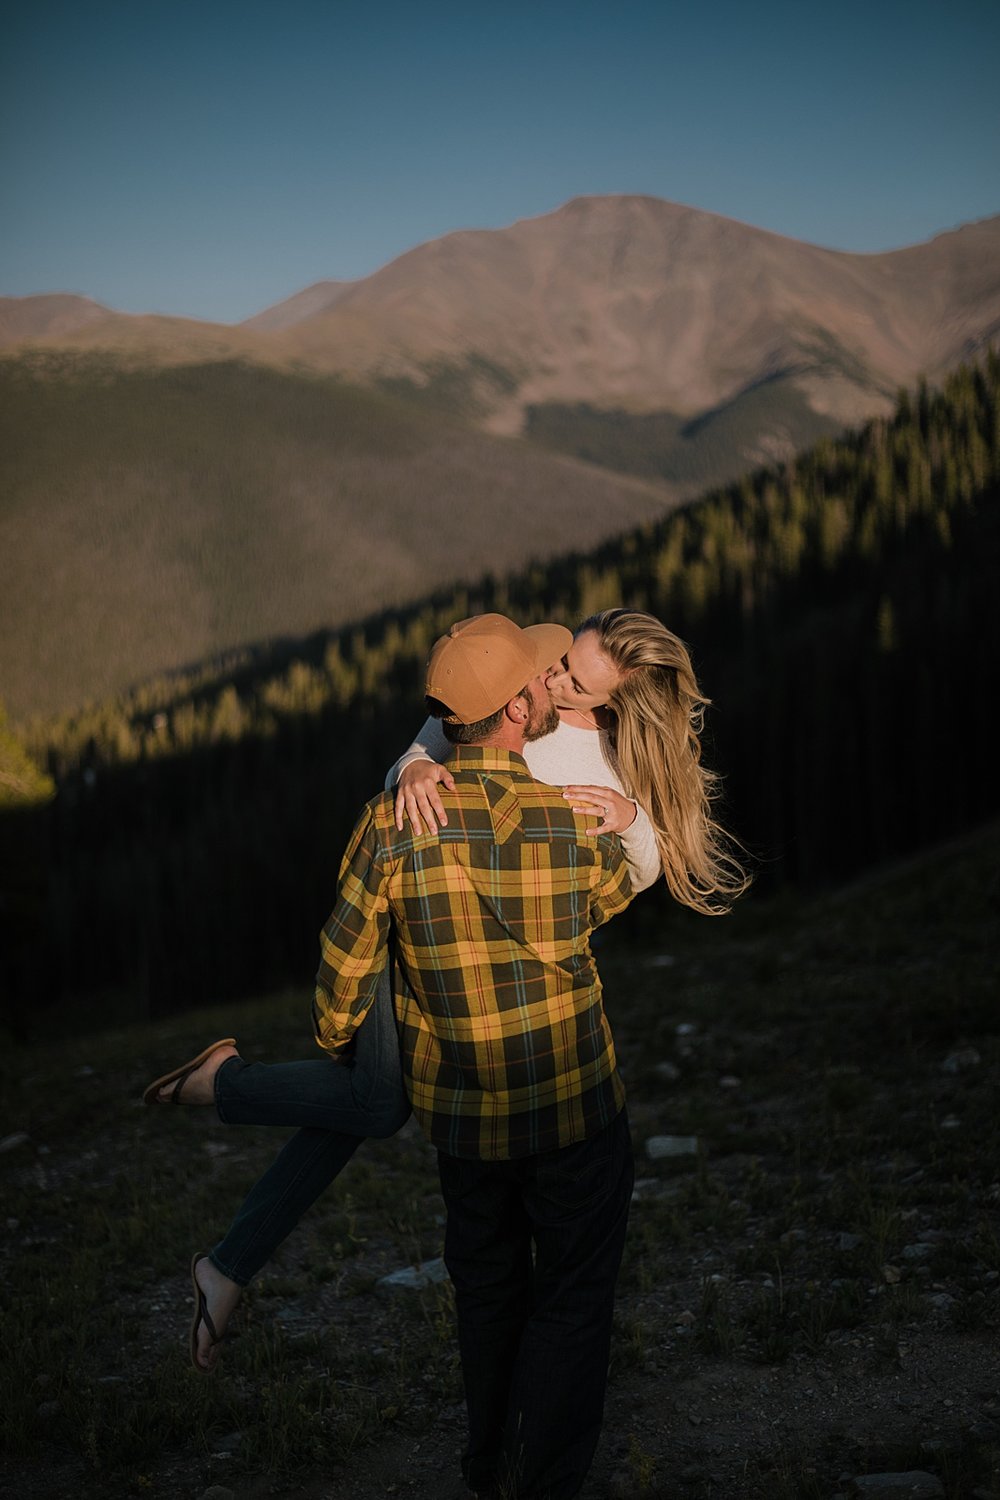 colorado mountain engagements, winter park resort at sunset, hiking winter park resort in the summer, summer hiking in winter park, sunset on winter park mountain, winter park wedding photographer